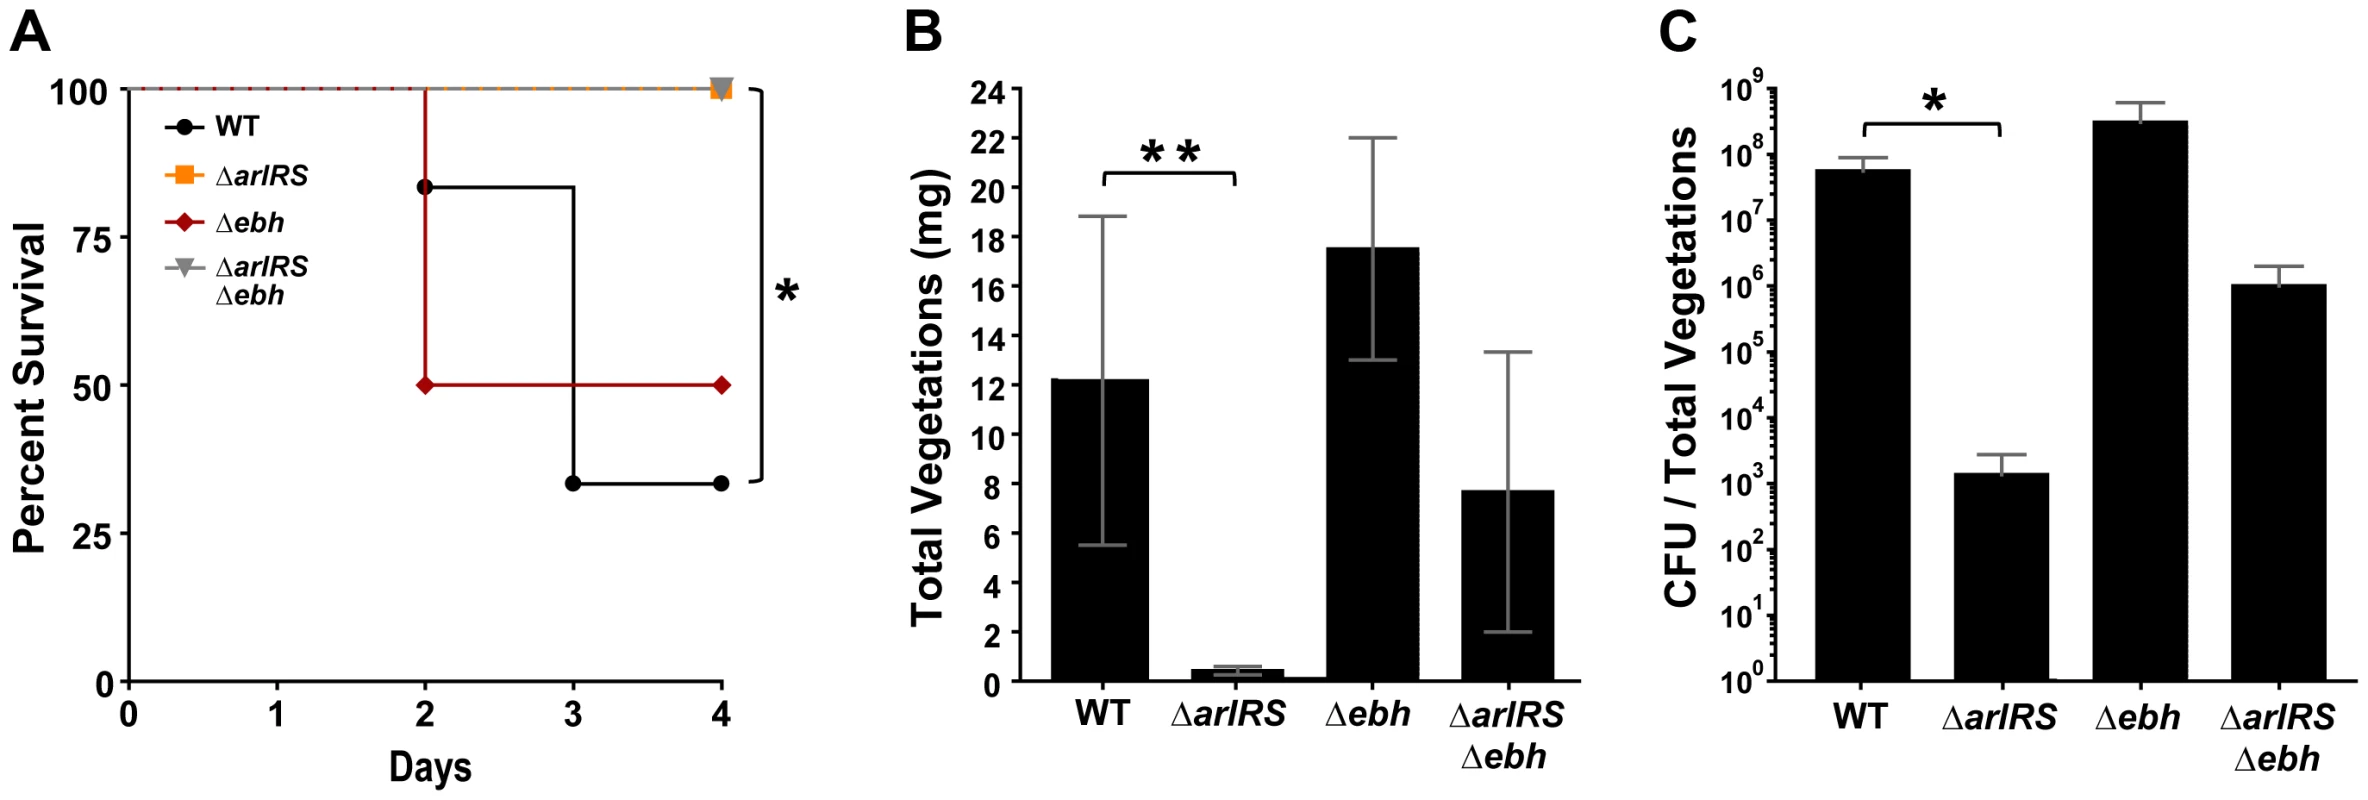 Strains lacking ArlRS are defective in a rabbit model of sepsis and endocarditis.